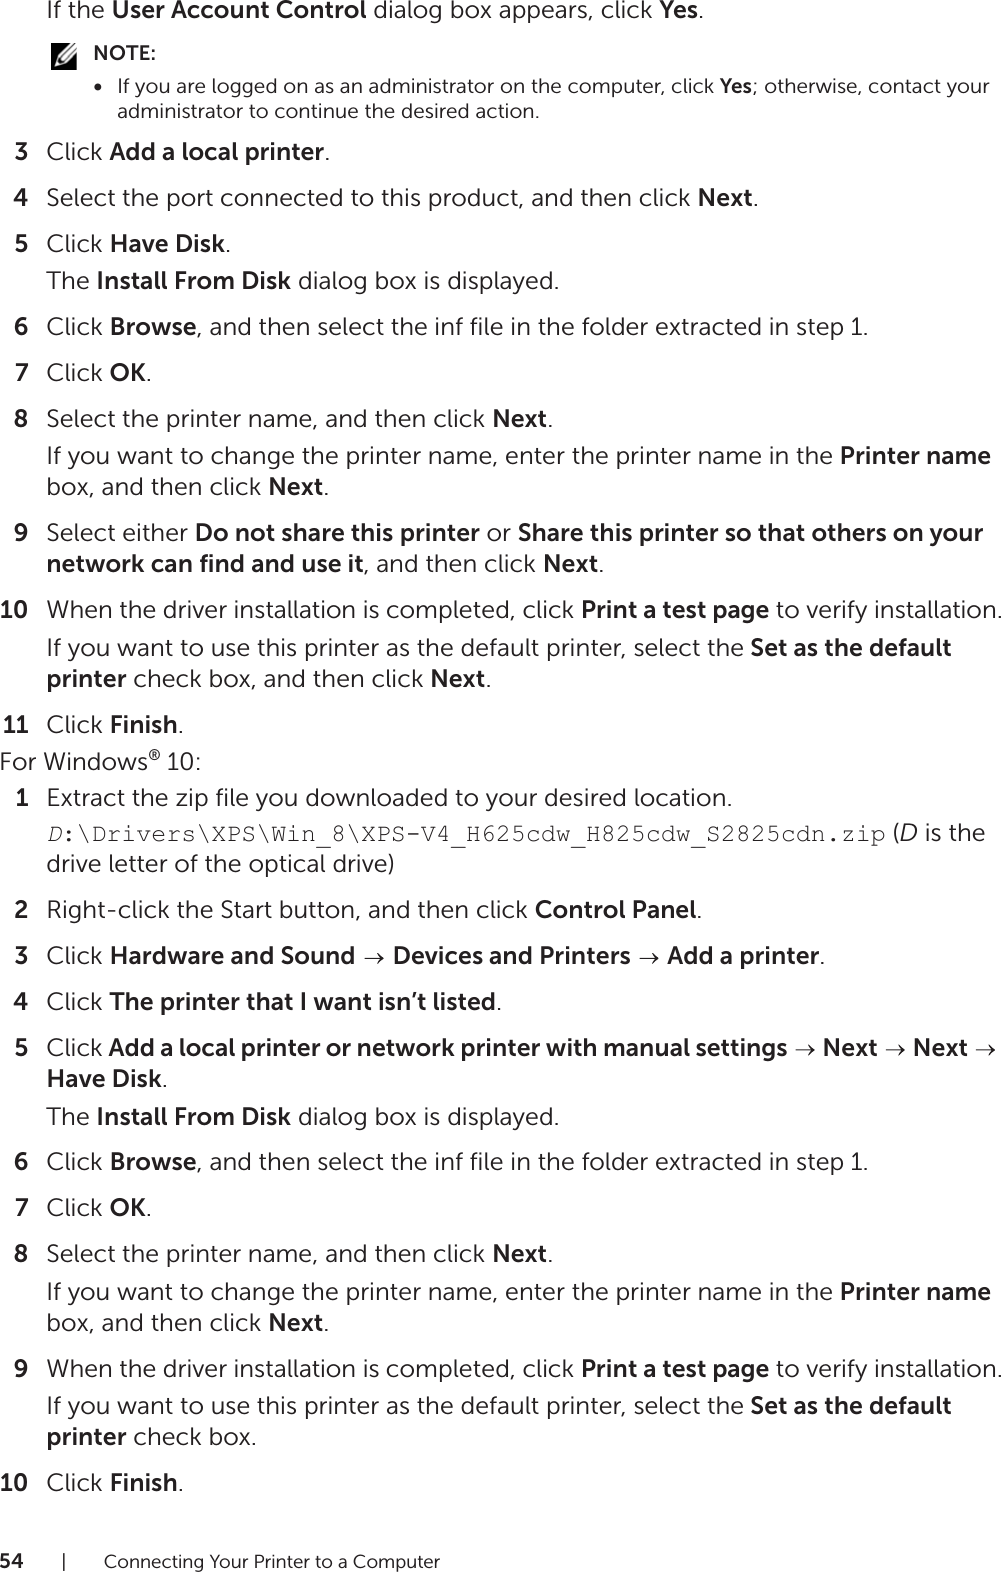 54| Connecting Your Printer to a ComputerIf the User Account Control dialog box appears, click Yes.NOTE:•If you are logged on as an administrator on the computer, click Yes; otherwise, contact your administrator to continue the desired action.3Click Add a local printer.4Select the port connected to this product, and then click Next.5Click Have Disk.The Install From Disk dialog box is displayed.6Click Browse, and then select the inf file in the folder extracted in step 1.7Click OK.8Select the printer name, and then click Next.If you want to change the printer name, enter the printer name in the Printer name box, and then click Next.9Select either Do not share this printer or Share this printer so that others on your network can find and use it, and then click Next.10 When the driver installation is completed, click Print a test page to verify installation.If you want to use this printer as the default printer, select the Set as the default printer check box, and then click Next.11 Click Finish.For Windows® 10:1Extract the zip file you downloaded to your desired location.D:\Drivers\XPS\Win_8\XPS-V4_H625cdw_H825cdw_S2825cdn.zip (D is the drive letter of the optical drive)2Right-click the Start button, and then click Control Panel.3Click Hardware and Sound  Devices and Printers  Add a printer.4Click The printer that I want isn’t listed.5Click Add a local printer or network printer with manual settings  Next  Next  Have Disk.The Install From Disk dialog box is displayed.6Click Browse, and then select the inf file in the folder extracted in step 1.7Click OK.8Select the printer name, and then click Next.If you want to change the printer name, enter the printer name in the Printer name box, and then click Next. 9When the driver installation is completed, click Print a test page to verify installation.If you want to use this printer as the default printer, select the Set as the default printer check box.10 Click Finish.